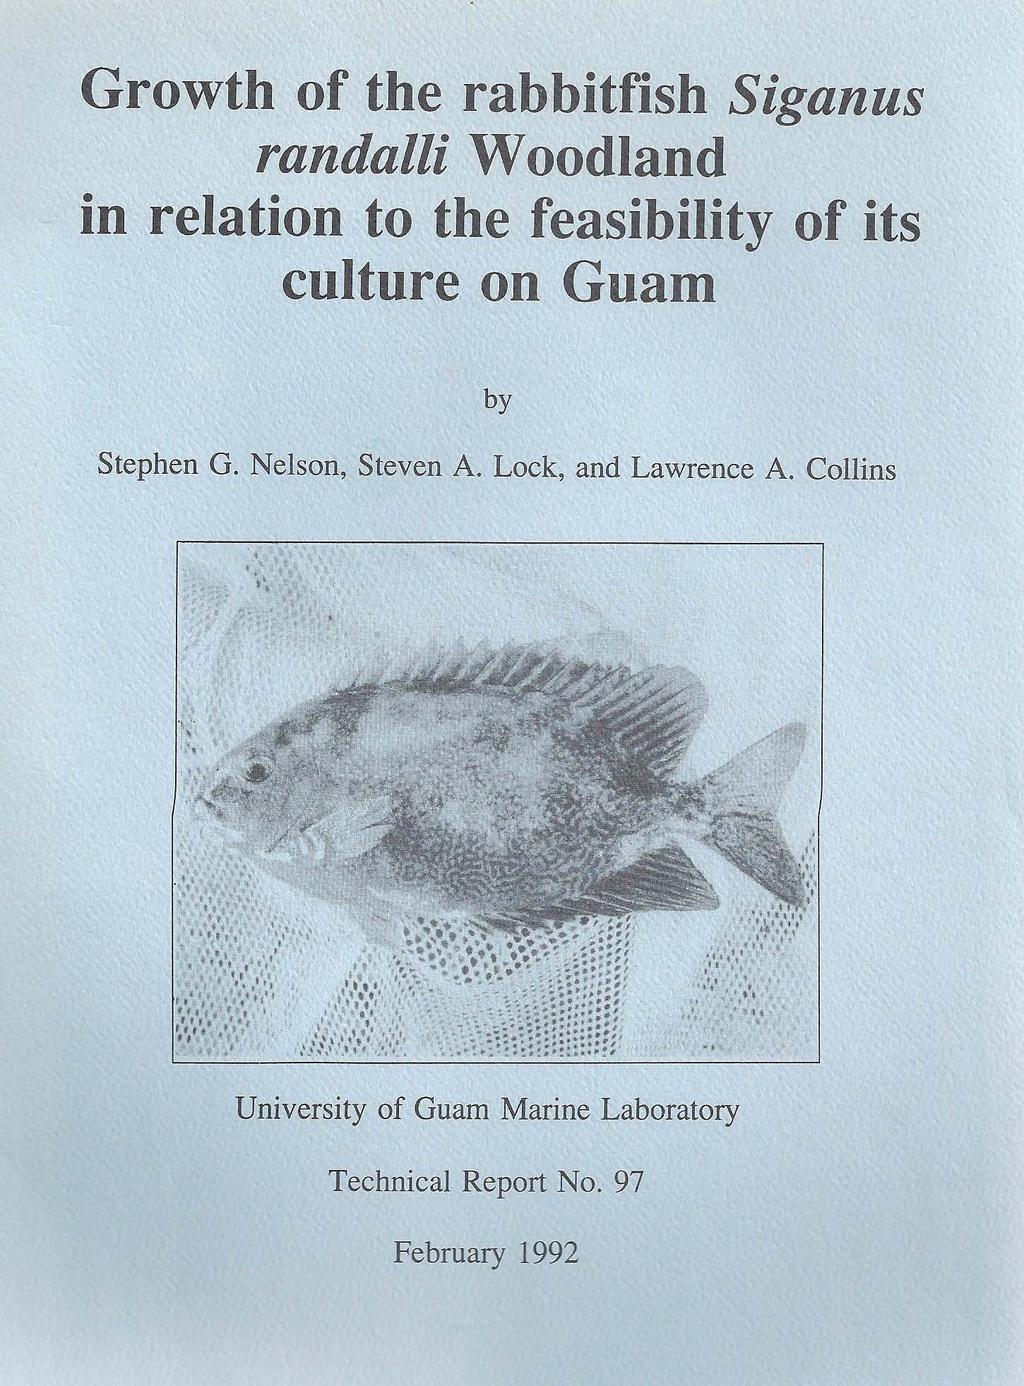 Growth of the rabbitfish Siganus randalli Woodland in relation to the feasibility of its culture on Guam by Stephen G.